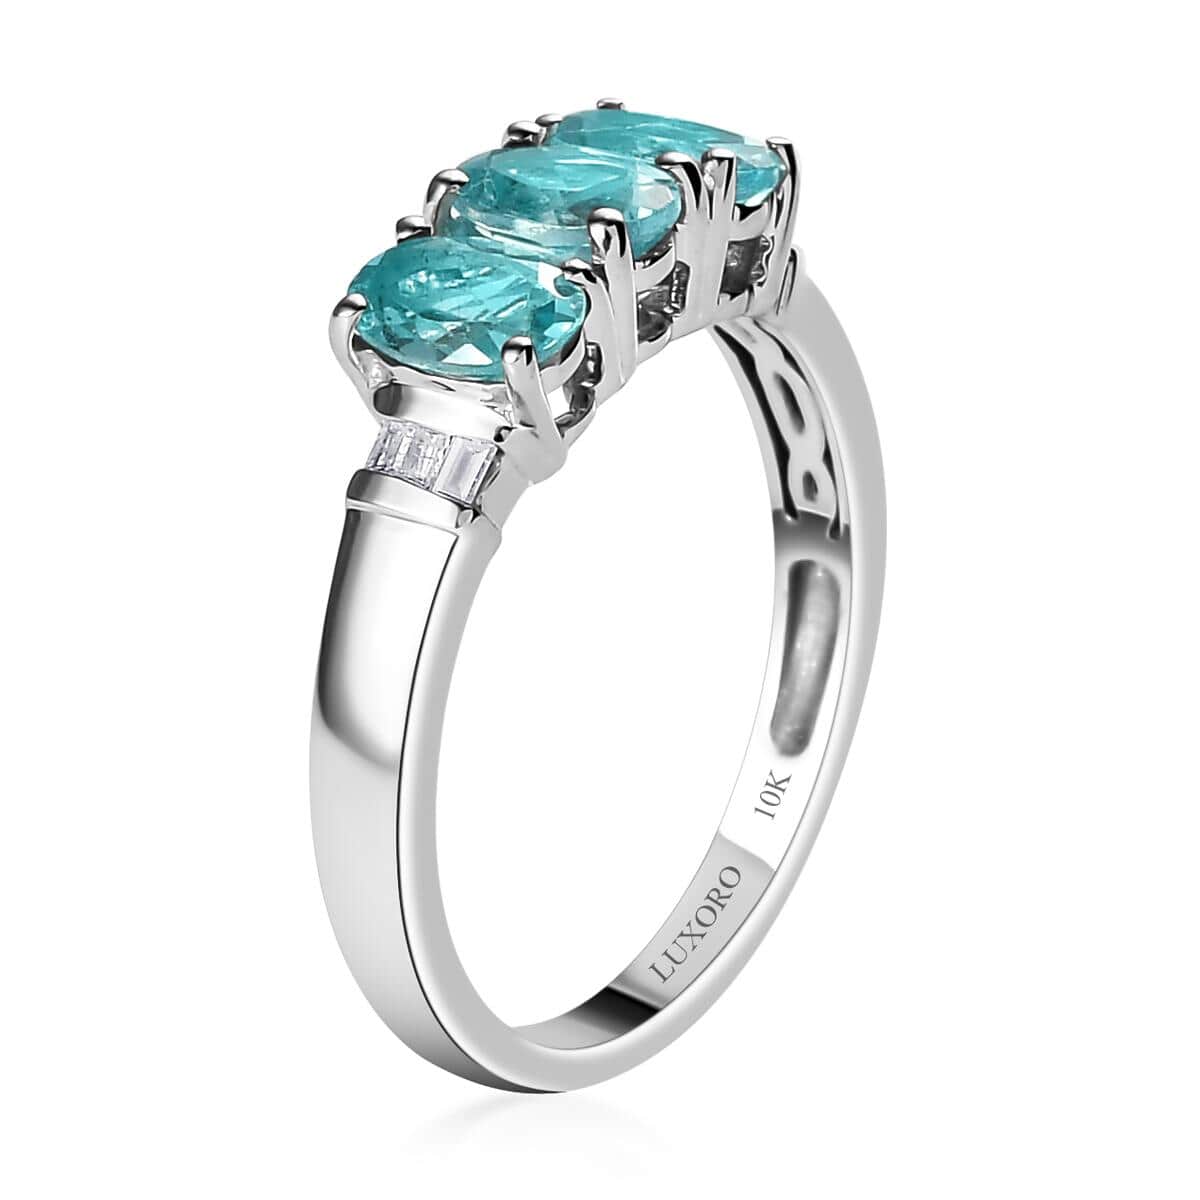 LUXORO 10K White Gold Premium Madagascar Paraiba Apatite, Diamond Trilogy Ring (Size 10.0) (2.50 g) (Delivery in 12-15 Business Days) 1.50 ctw image number 3